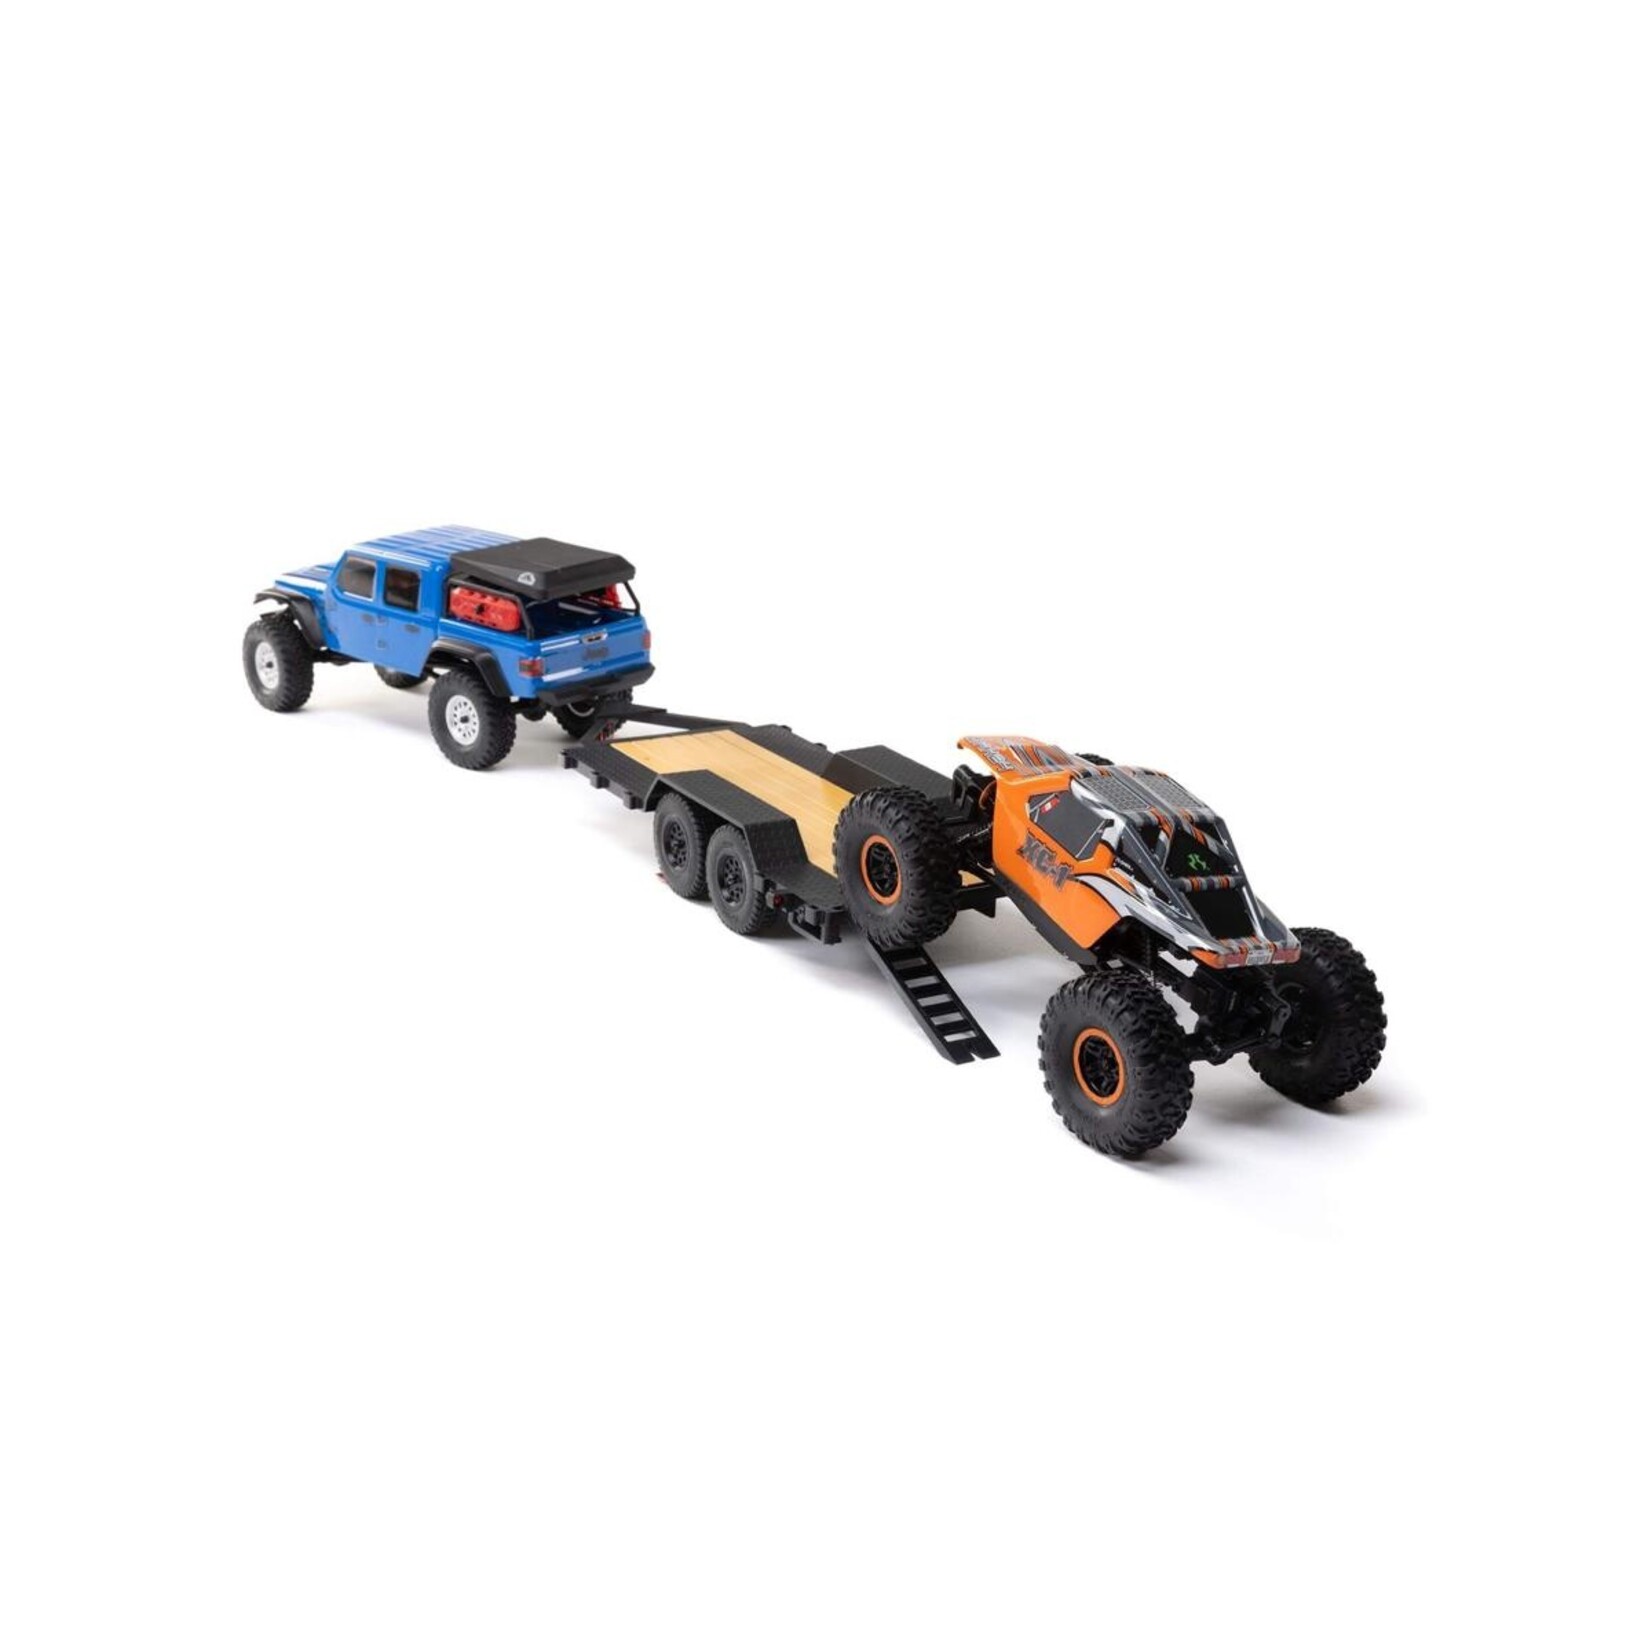 Axial Axial SCX24 Flat Bed Mini Vehicle Trailer w/LED Taillights #AXI00009